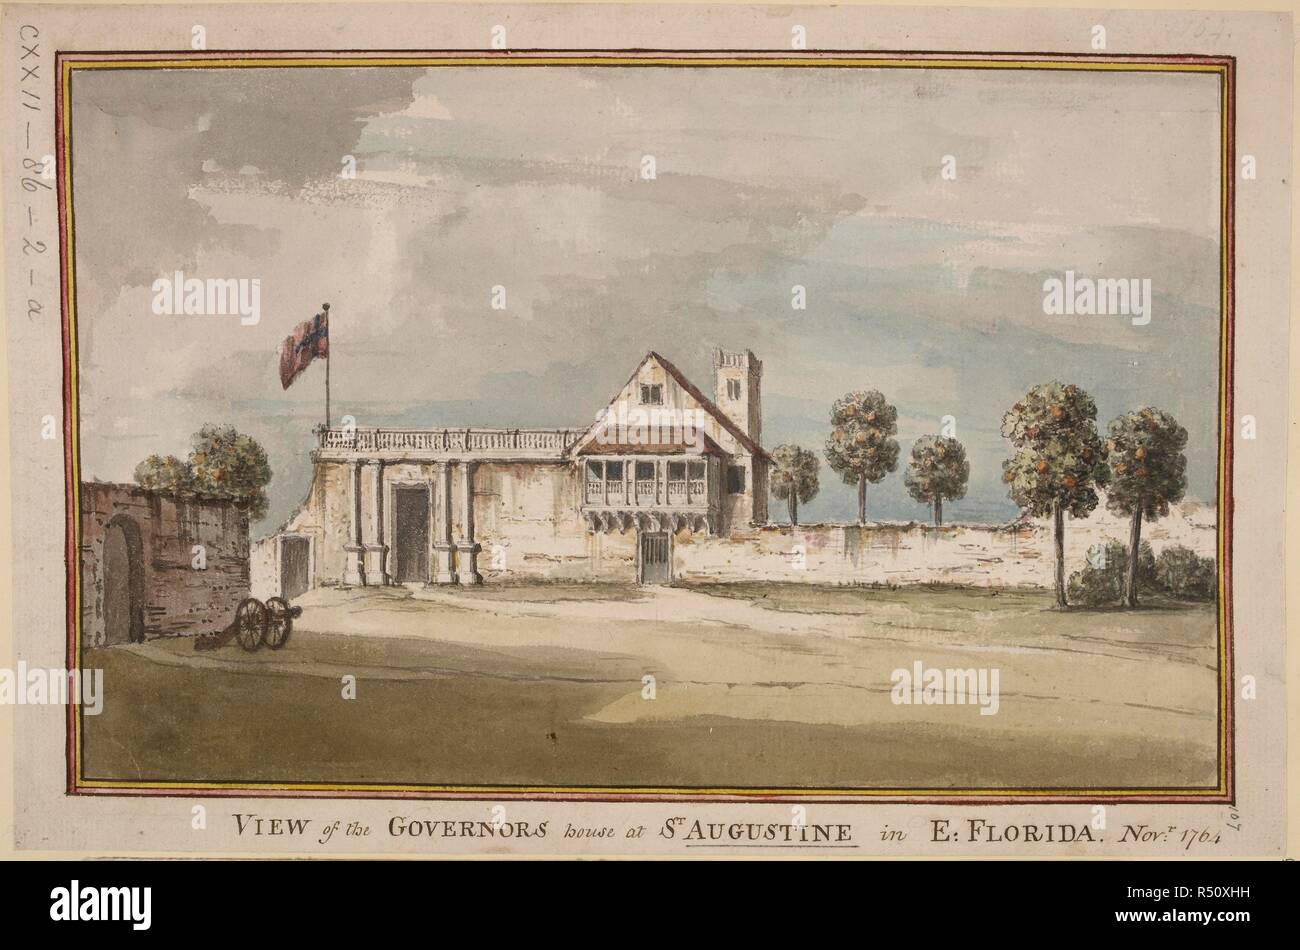 Picture of the governor's house, East Florida. view of the Governorâ€™s house at St. Augustine, in East Florida. A colored "view of the Governorâ€™s house at St. Augustine, in East Florida, Nov. 1764". Source: Maps K.Top.122.86.2-a. Stock Photo